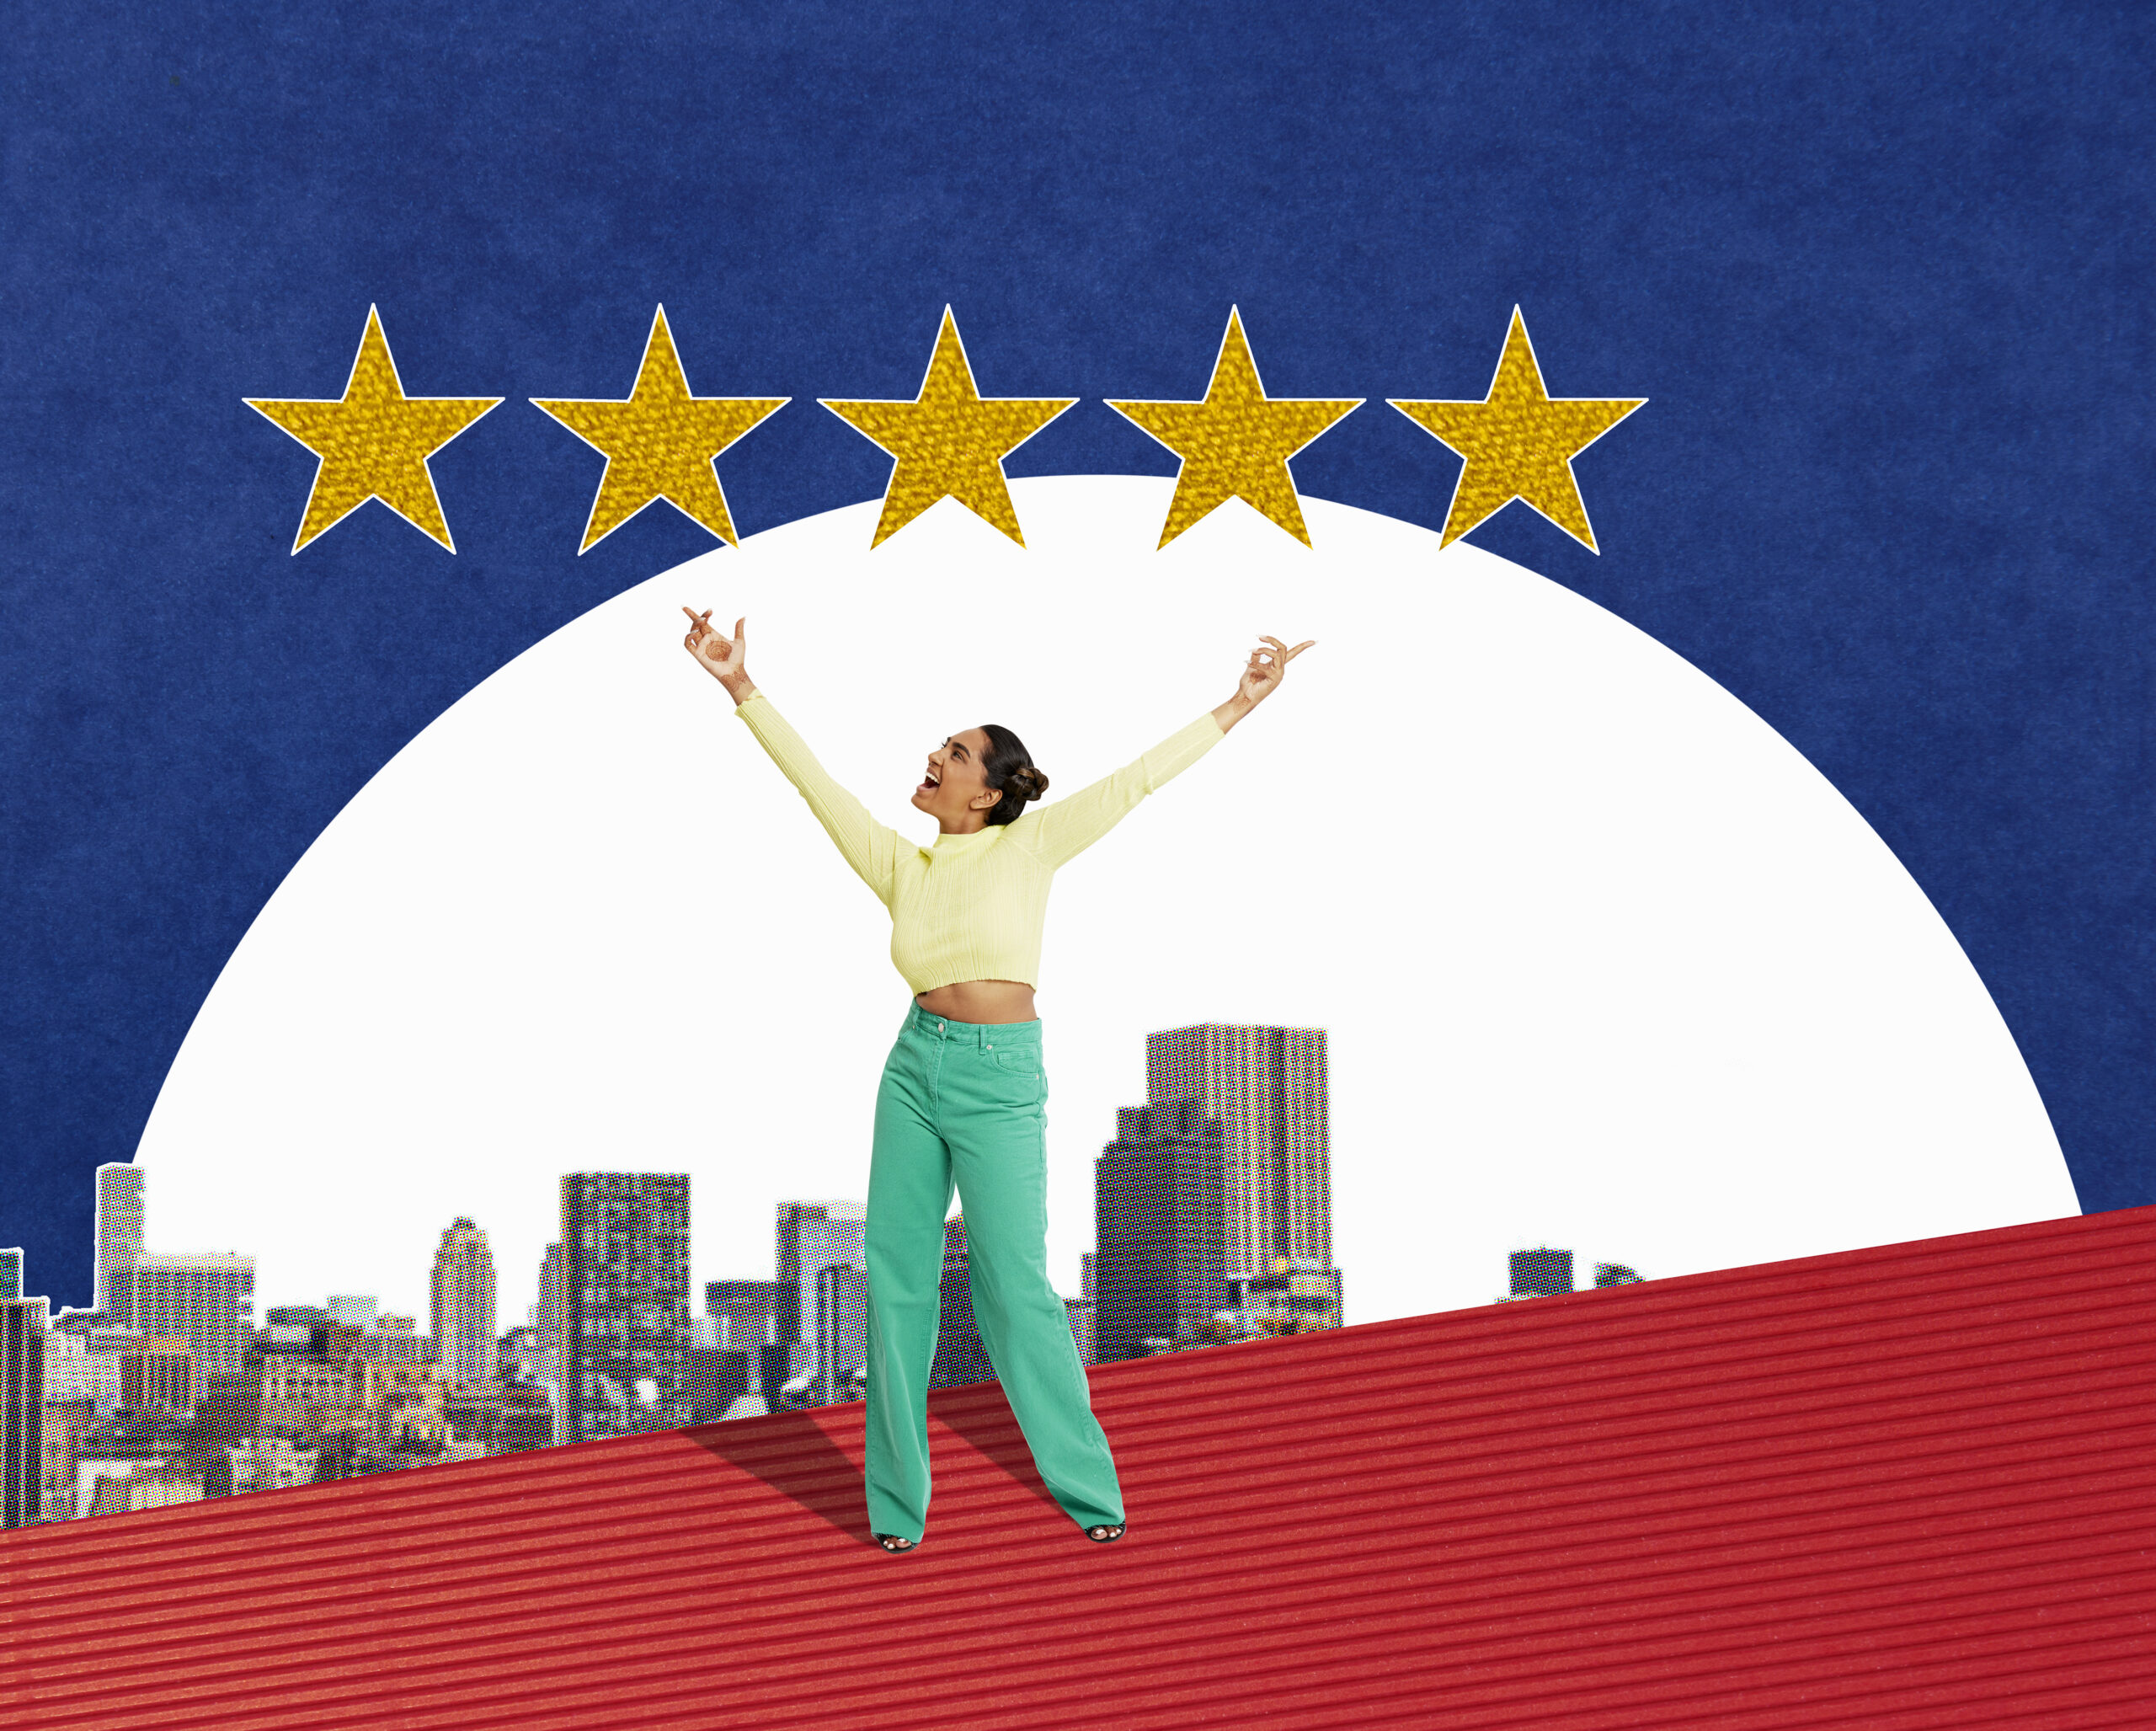 Collage of young woman holding hands in the air looking up to 5 gold stars above a city skyline